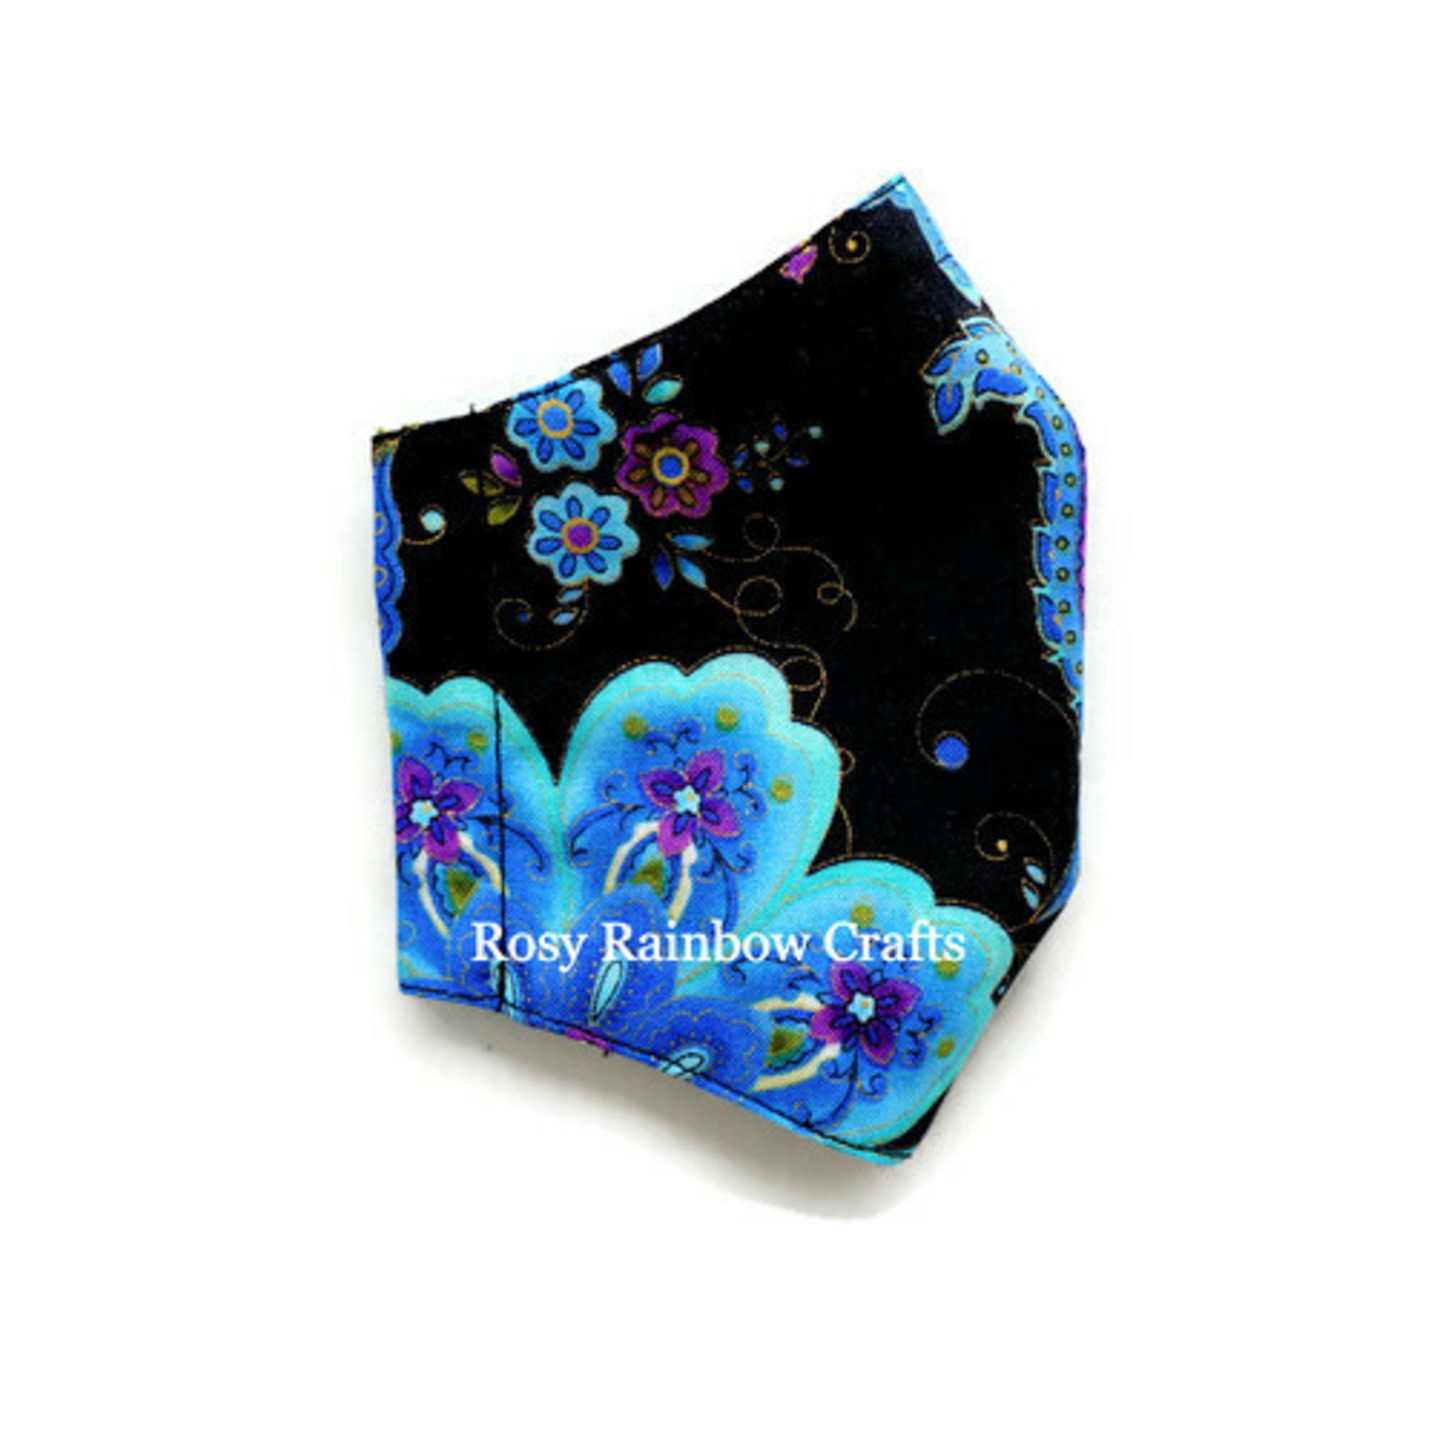 Exclusive Handmade 3D Seamless Masks Blue Paisley Florals In Black Medium 8-12 years old